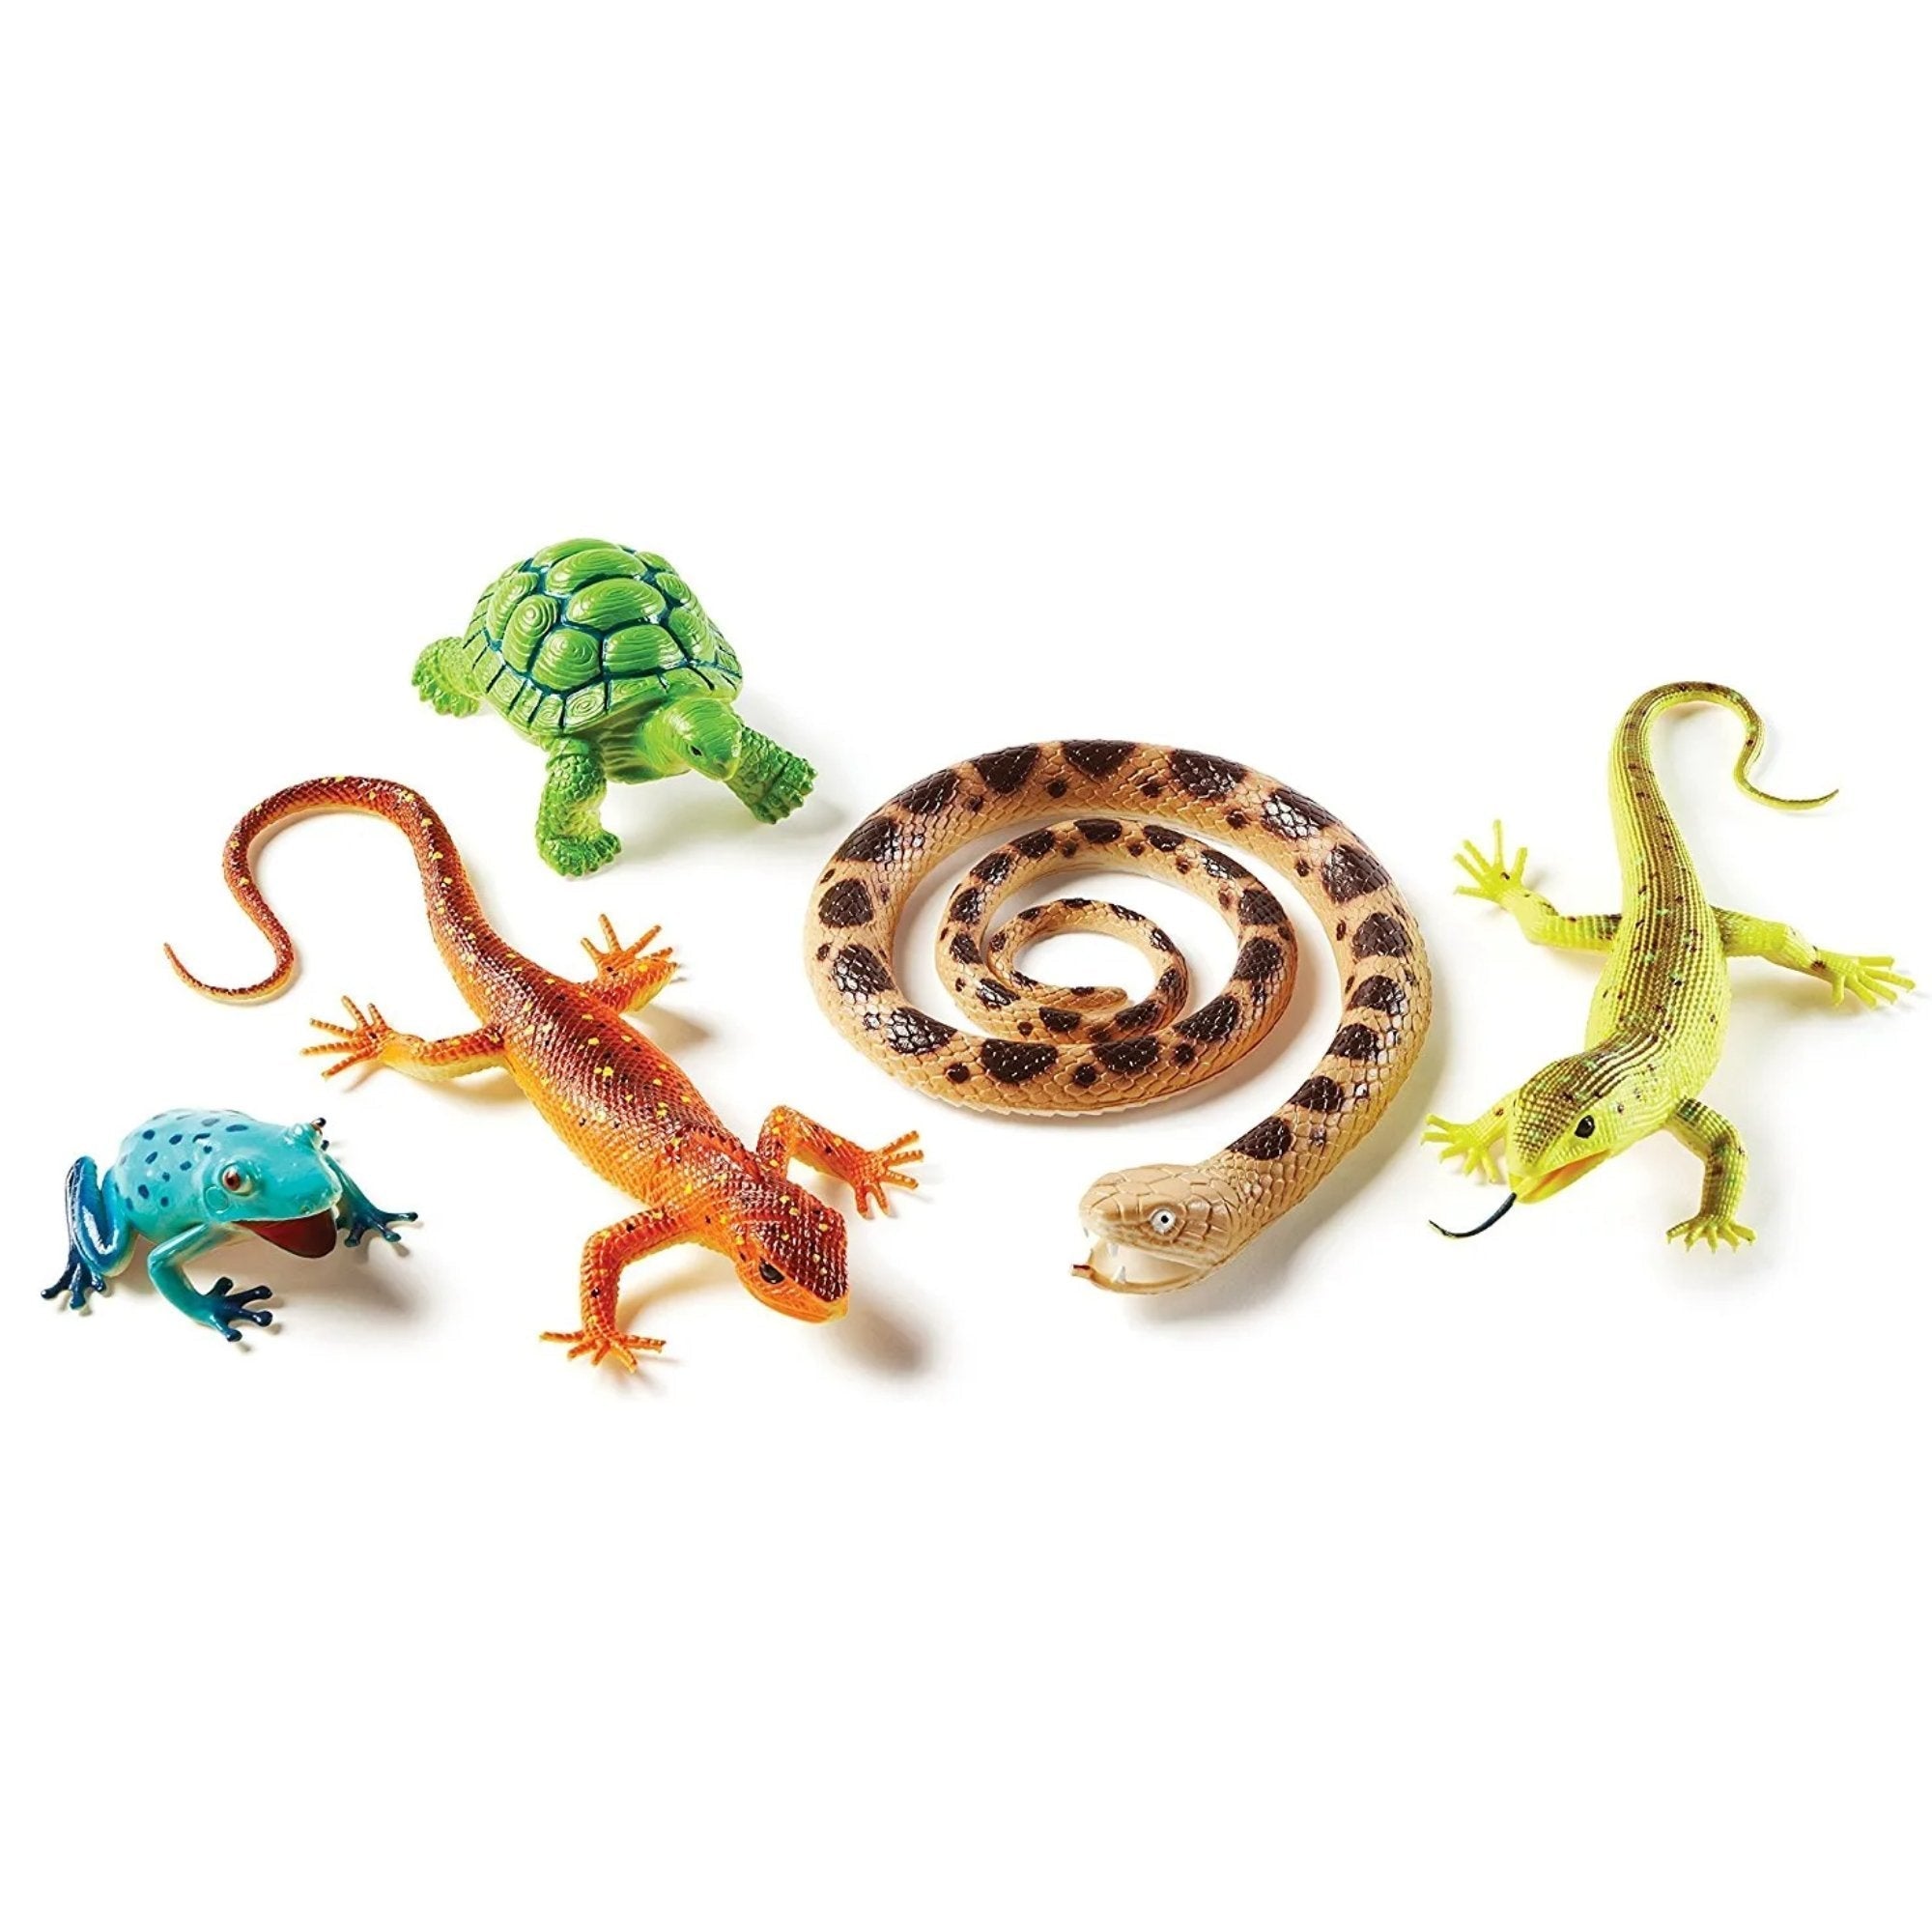 Jumbo Reptiles & Amphibians, Ideal for imaginative play, this durable and realistically detailed Jumbo Reptiles and Amphibians Set is perfectly sized for little hands. This Jumbo Reptiles & Amphibians set includes 5 animals: gecko, snake, tree frog, tortoise and iguana. Teach young learners about the slither of a snake, the chirp of a colourful tree frog, and the darting glances of a gecko with this five-piece set (which also includes a tortoise and an iguana), or let imaginations run from one wild kingdom 